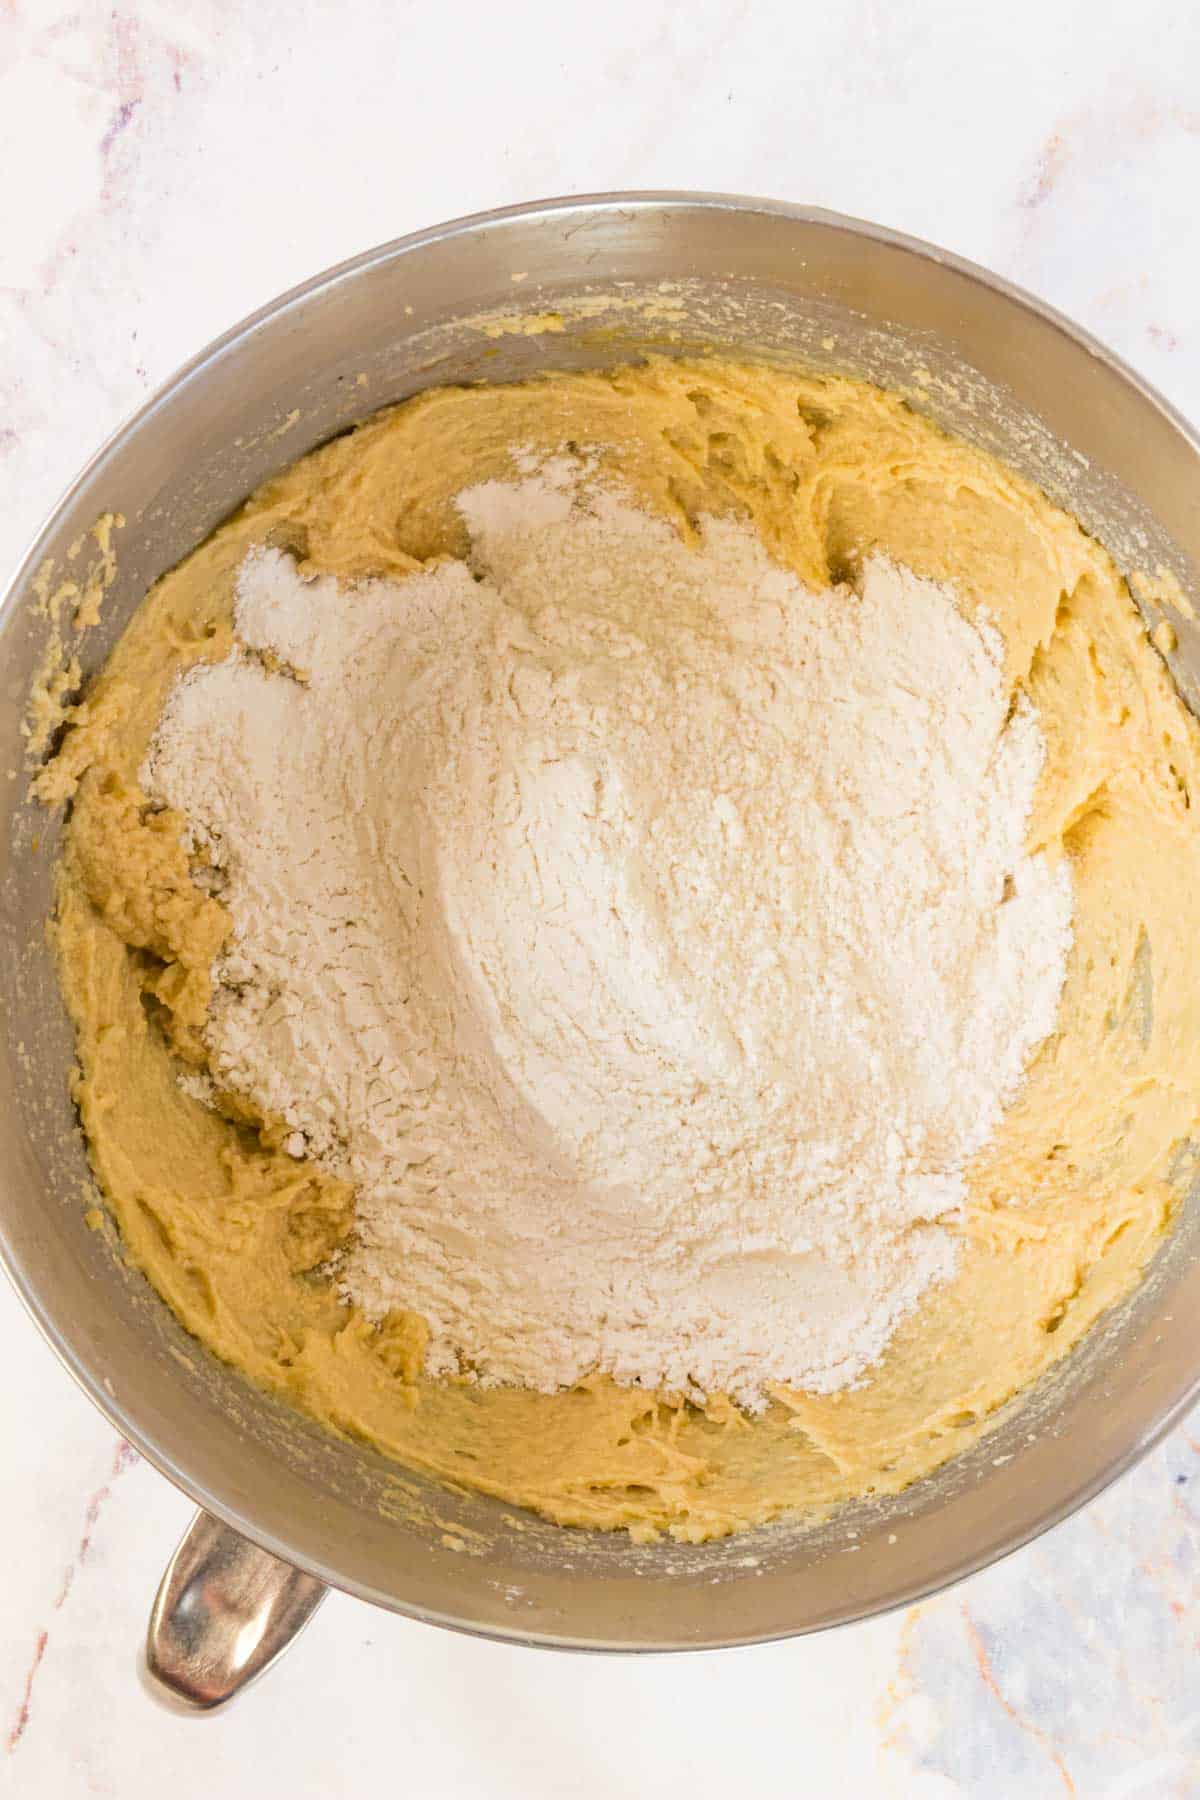 Flour is added into the wet ingredients for gluten-free cookie dough.